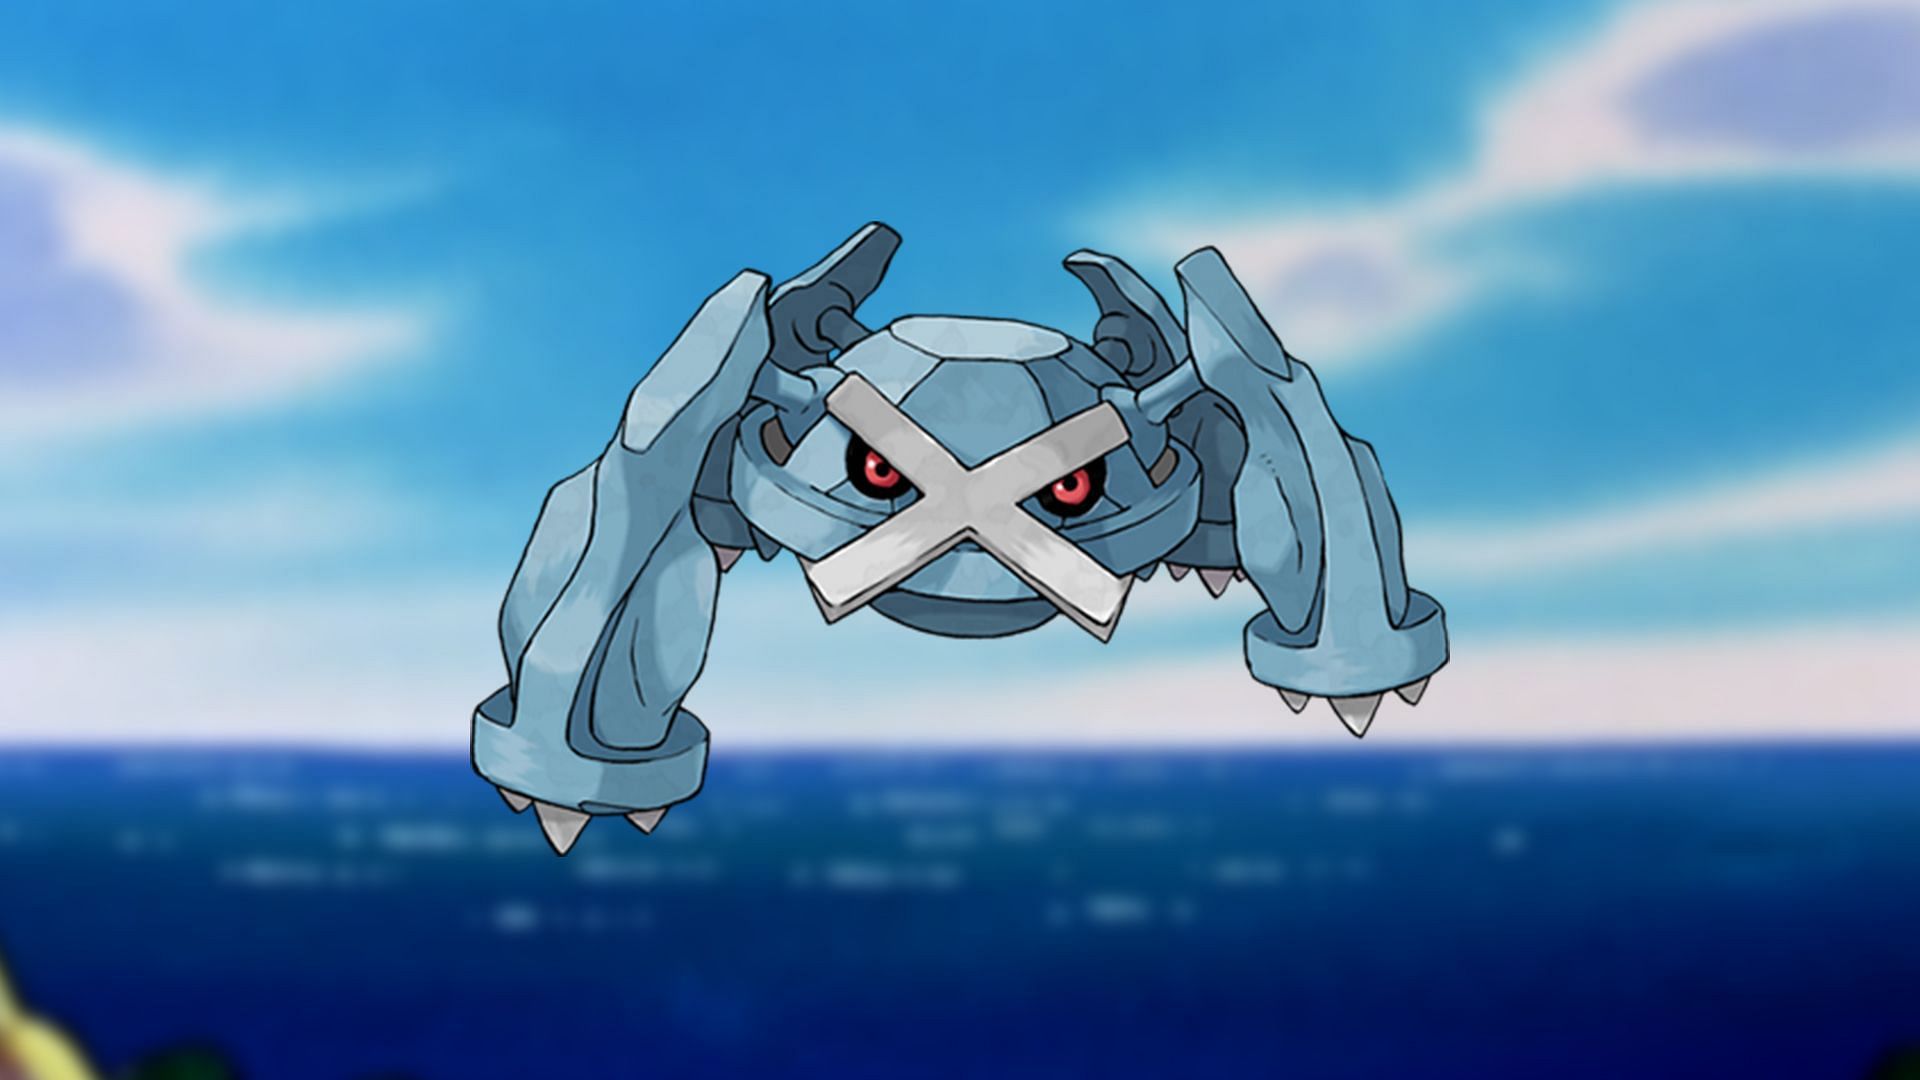 Metagross as it appears in the anime (Image via Niantic)